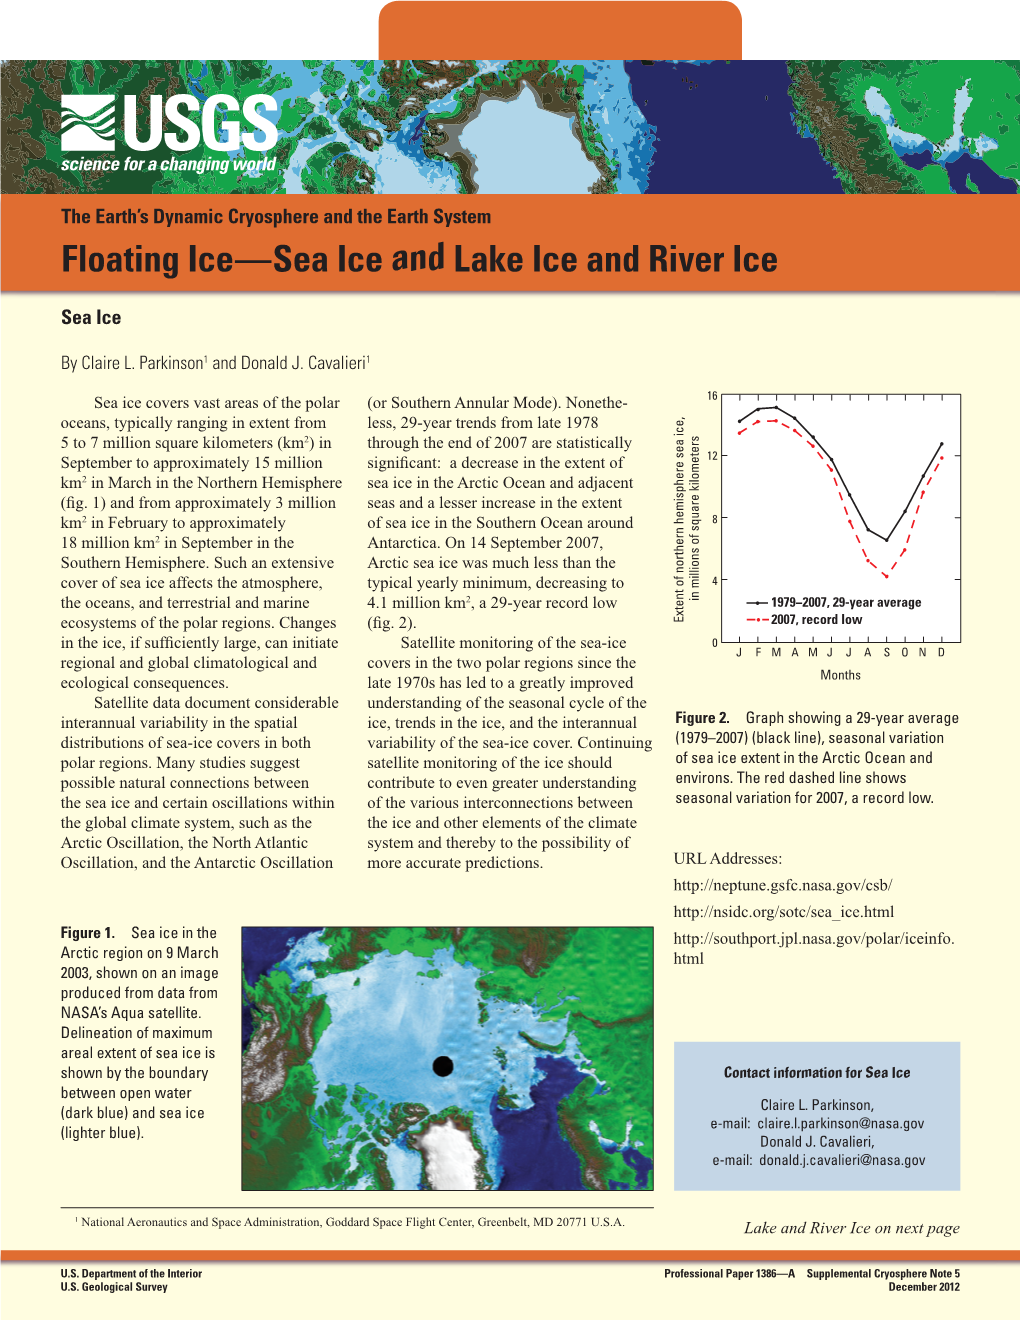 Floating Ice—Sea Ice and Lake Ice and River Ice